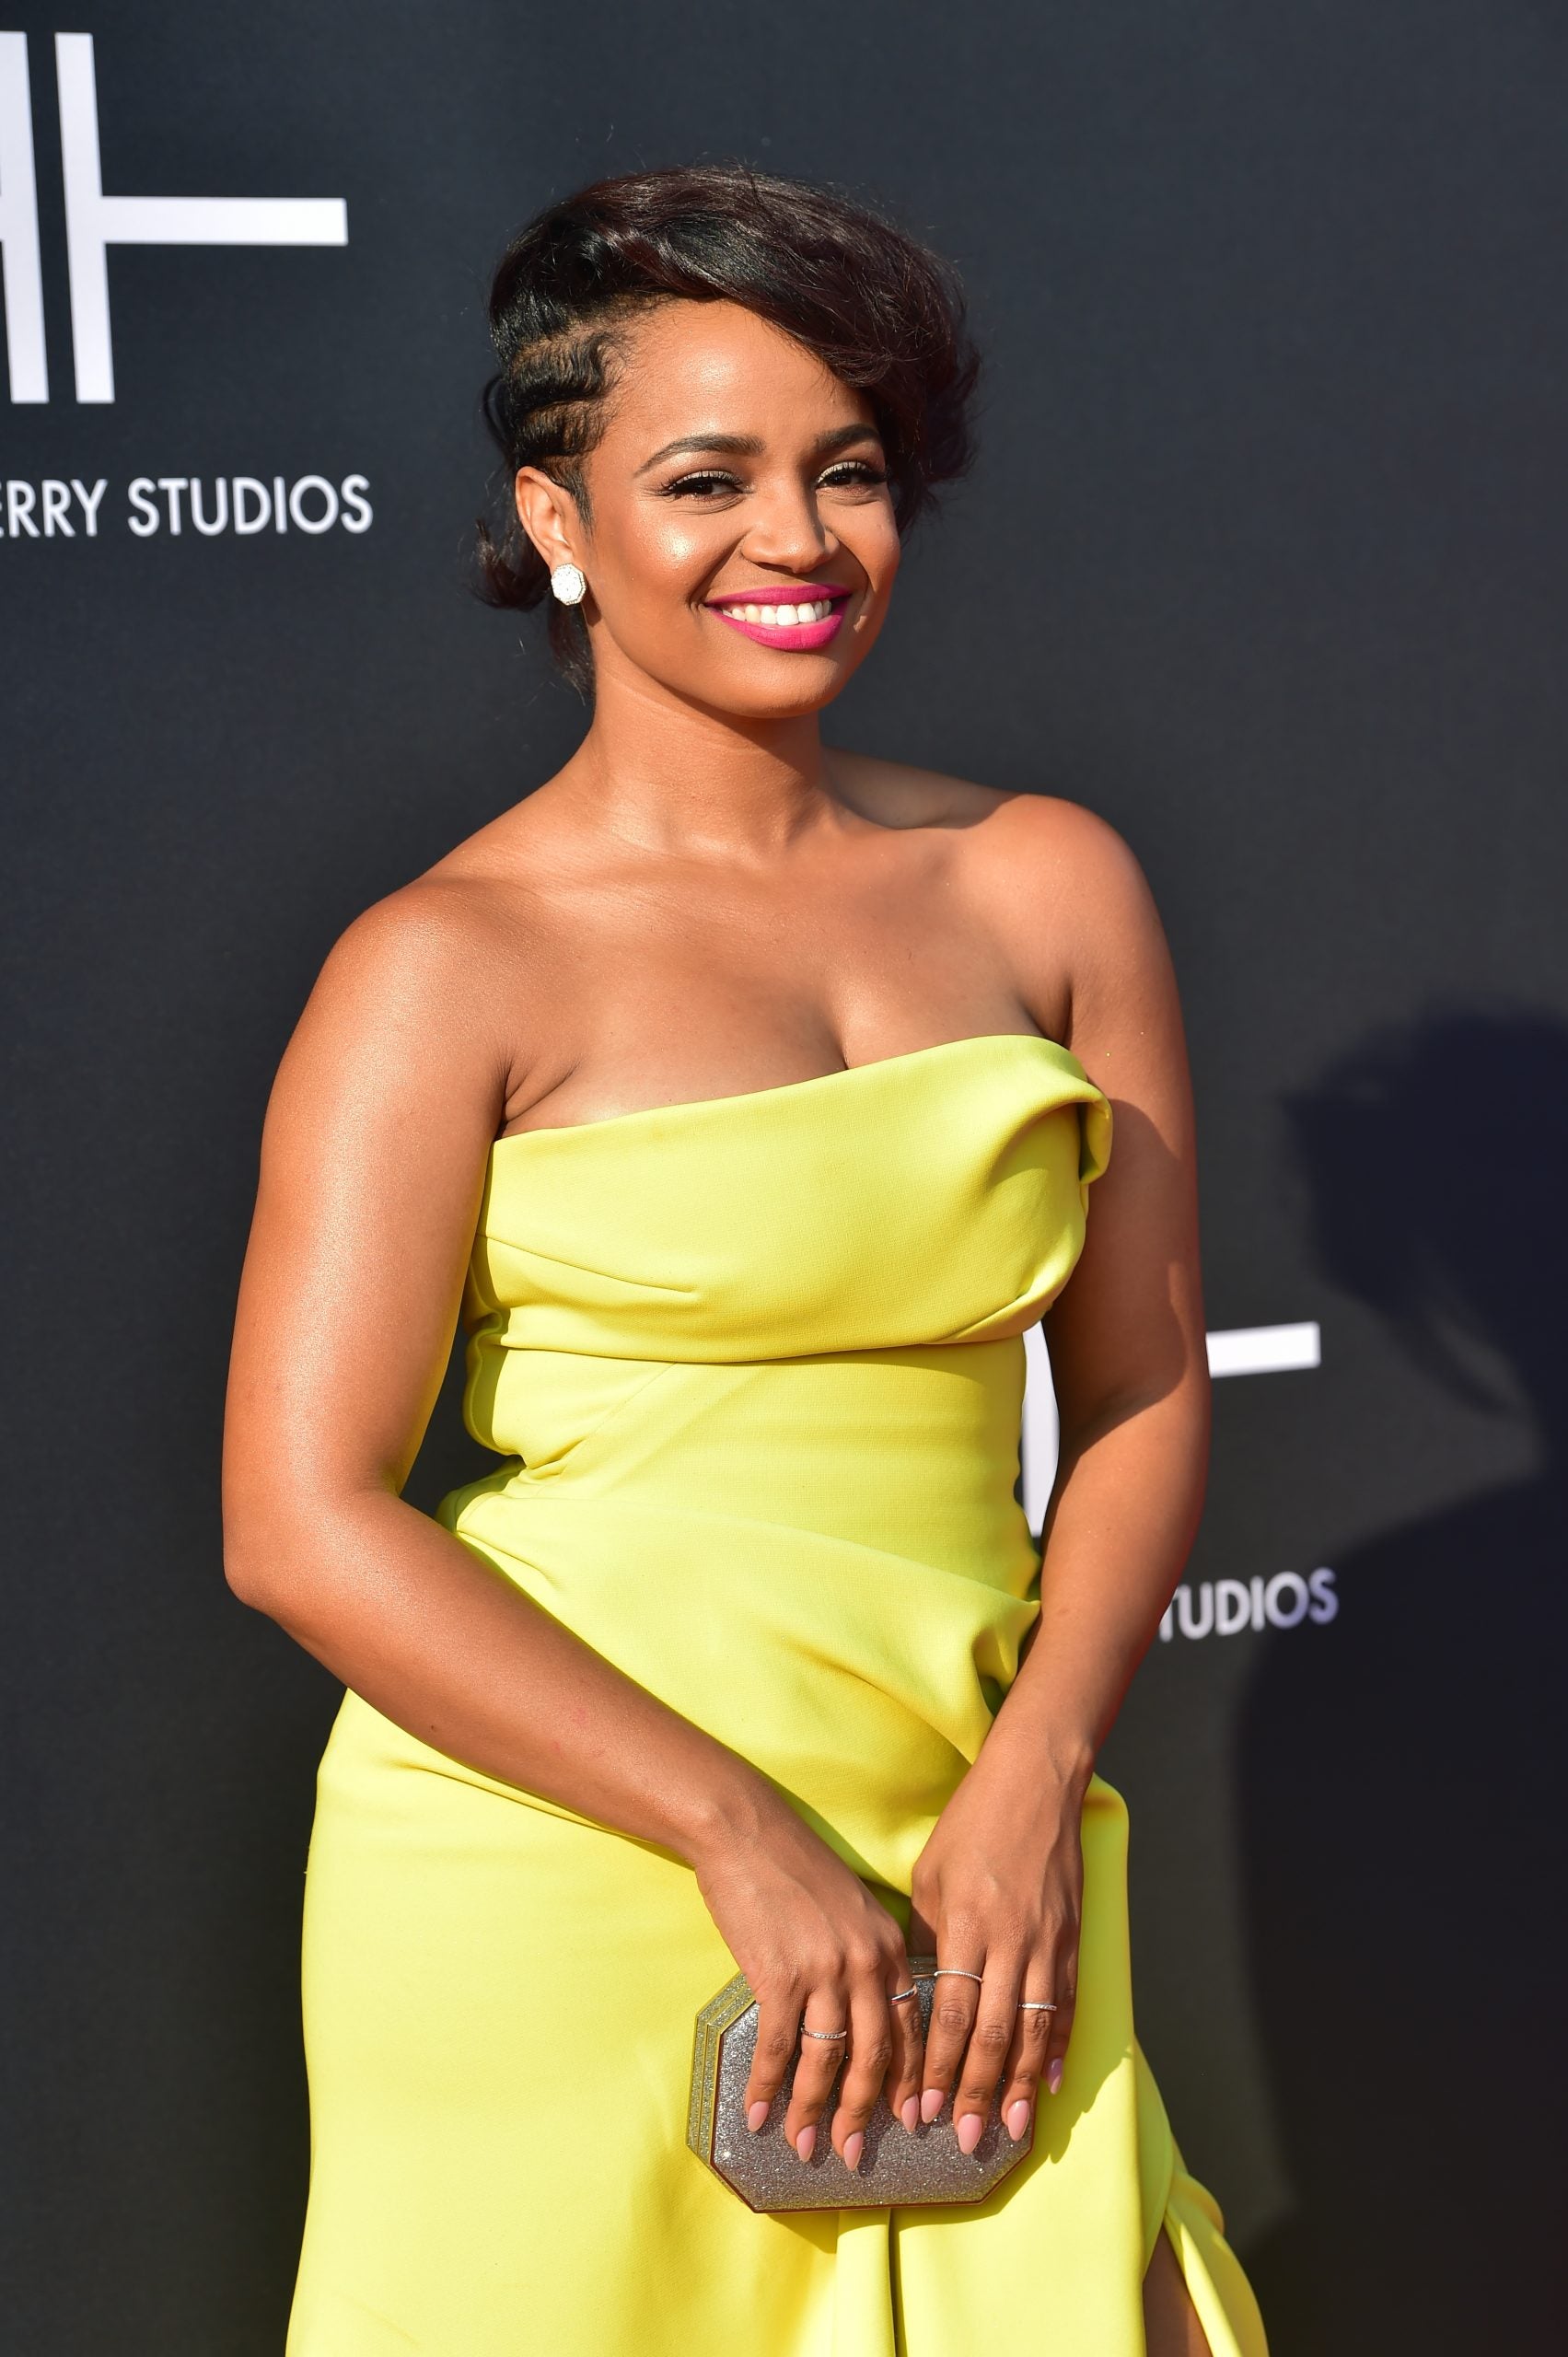 Kyla Pratt’s Real Life Is As Romantic As The Lifetime Movie She Stars In